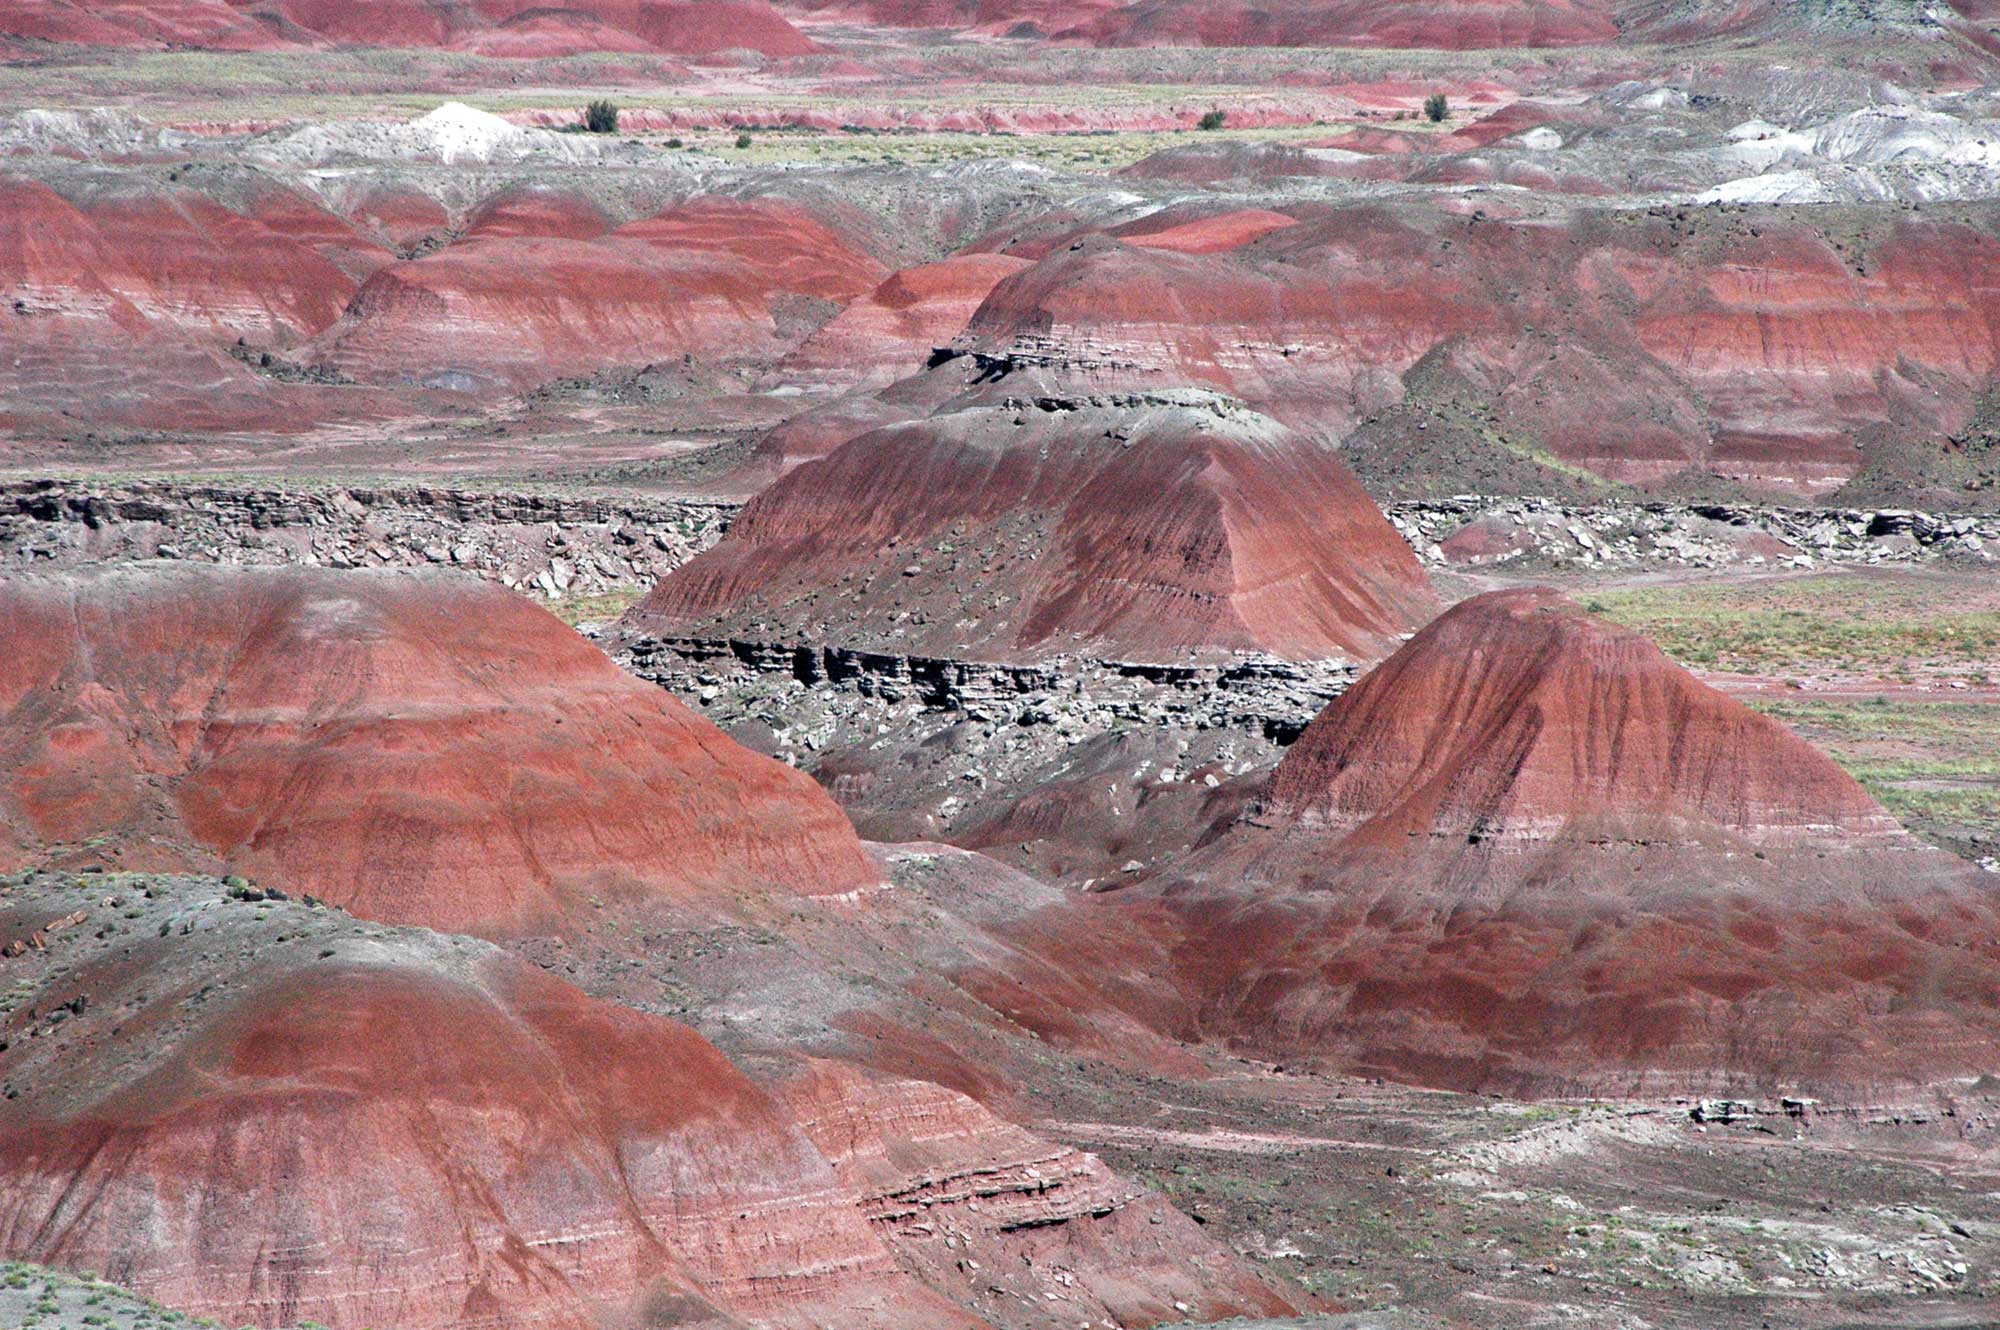 Photograph of badlands in the Painted Desert, Arizona. The badlands are a series of rounded hills with no vegetation on them. They are predominantly red in color, with some pinkish or white horizontal stripes. The slopes of the badlands are furrowed from erosion. Some plants occur on flat ground between the hills.